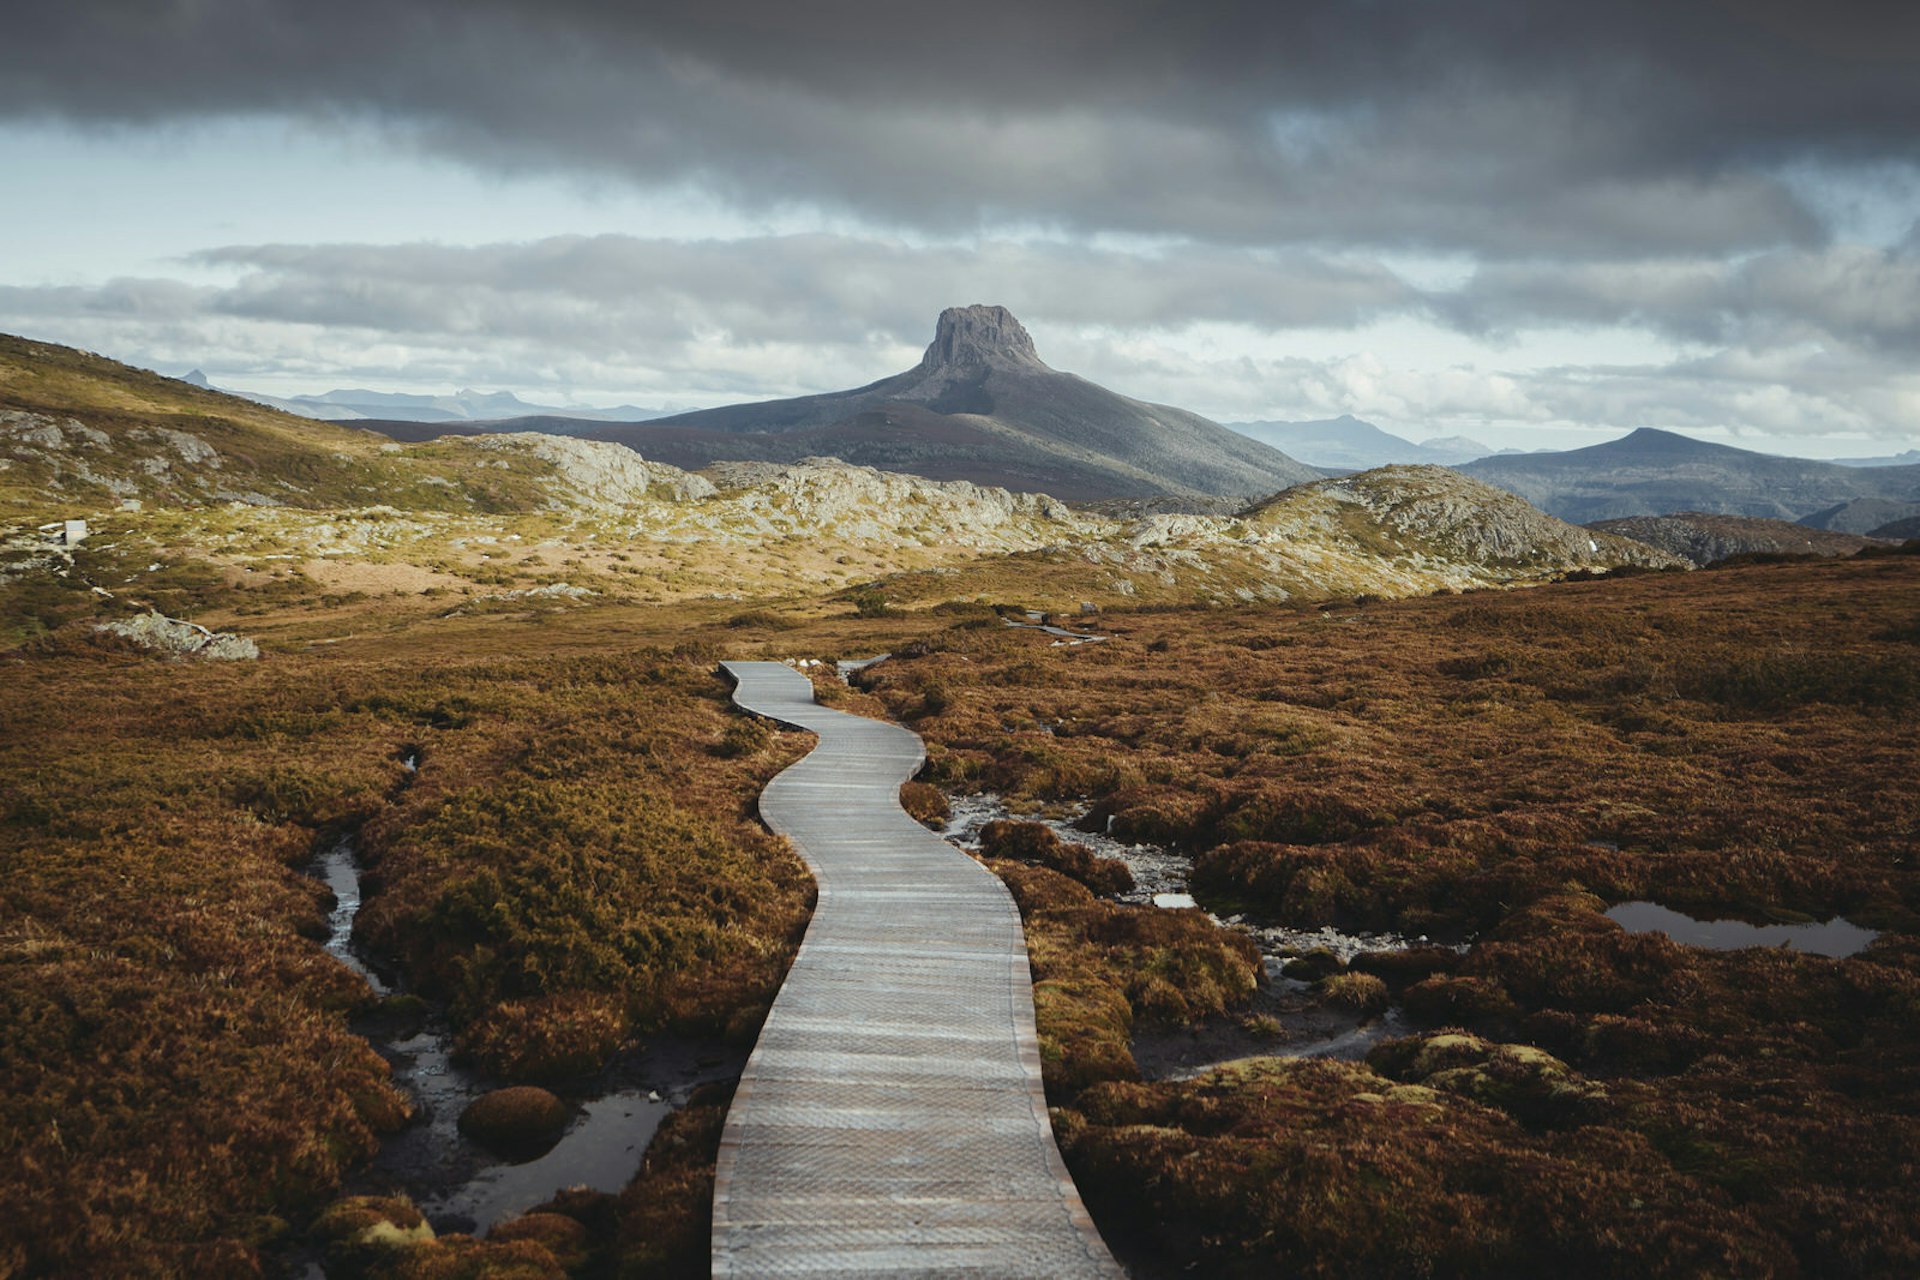 A wooden footpath stretches away from the camera over russet shrubbery and rock pools on Tasmania's Overland Trail. There is a distinctly square rocky peak in the distance underneath an overcast sky 